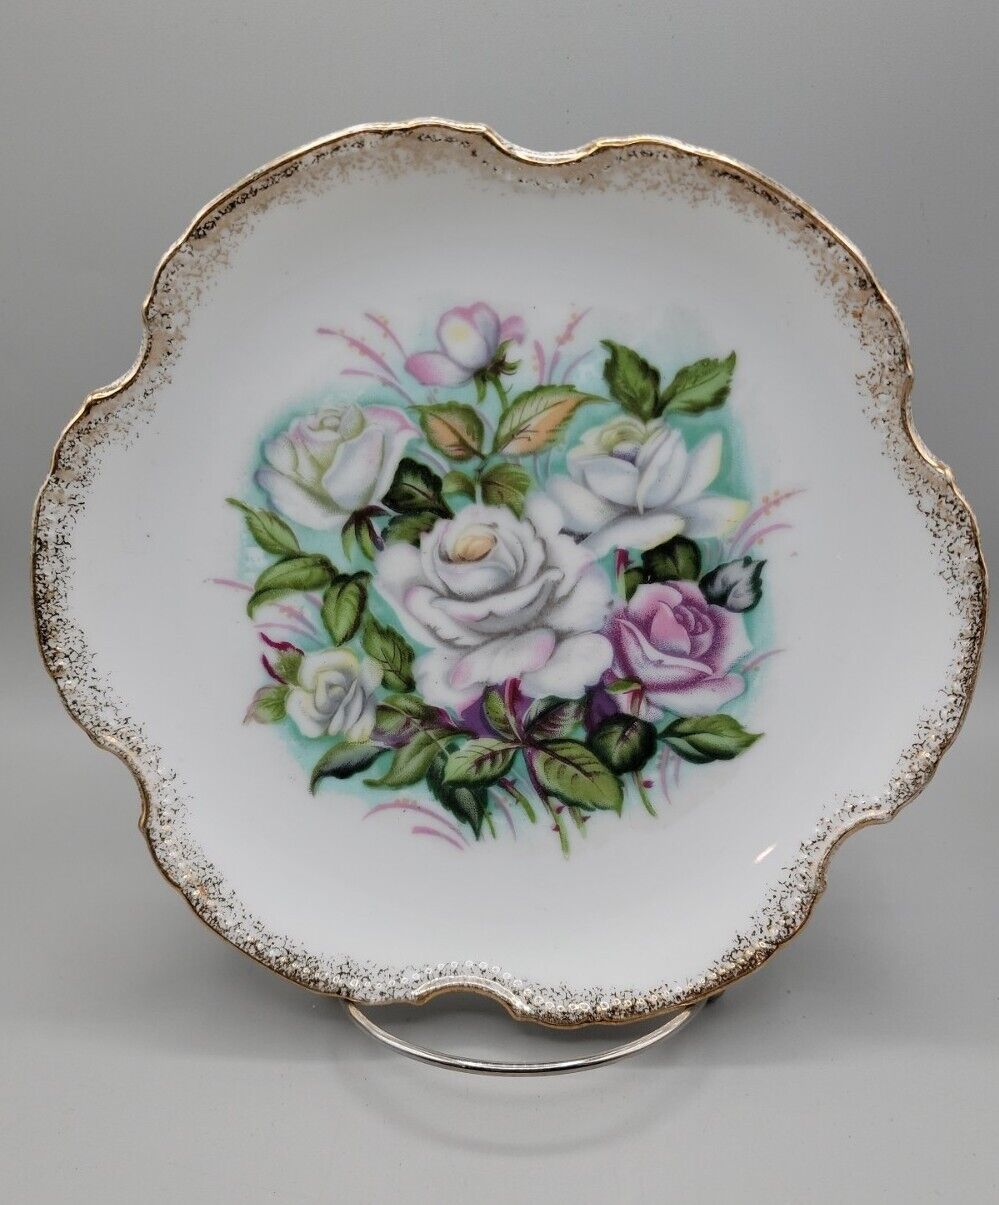 Vintage Pink White Purple Rose Wall Plate Made In Japan Gold Trim 8 1/4